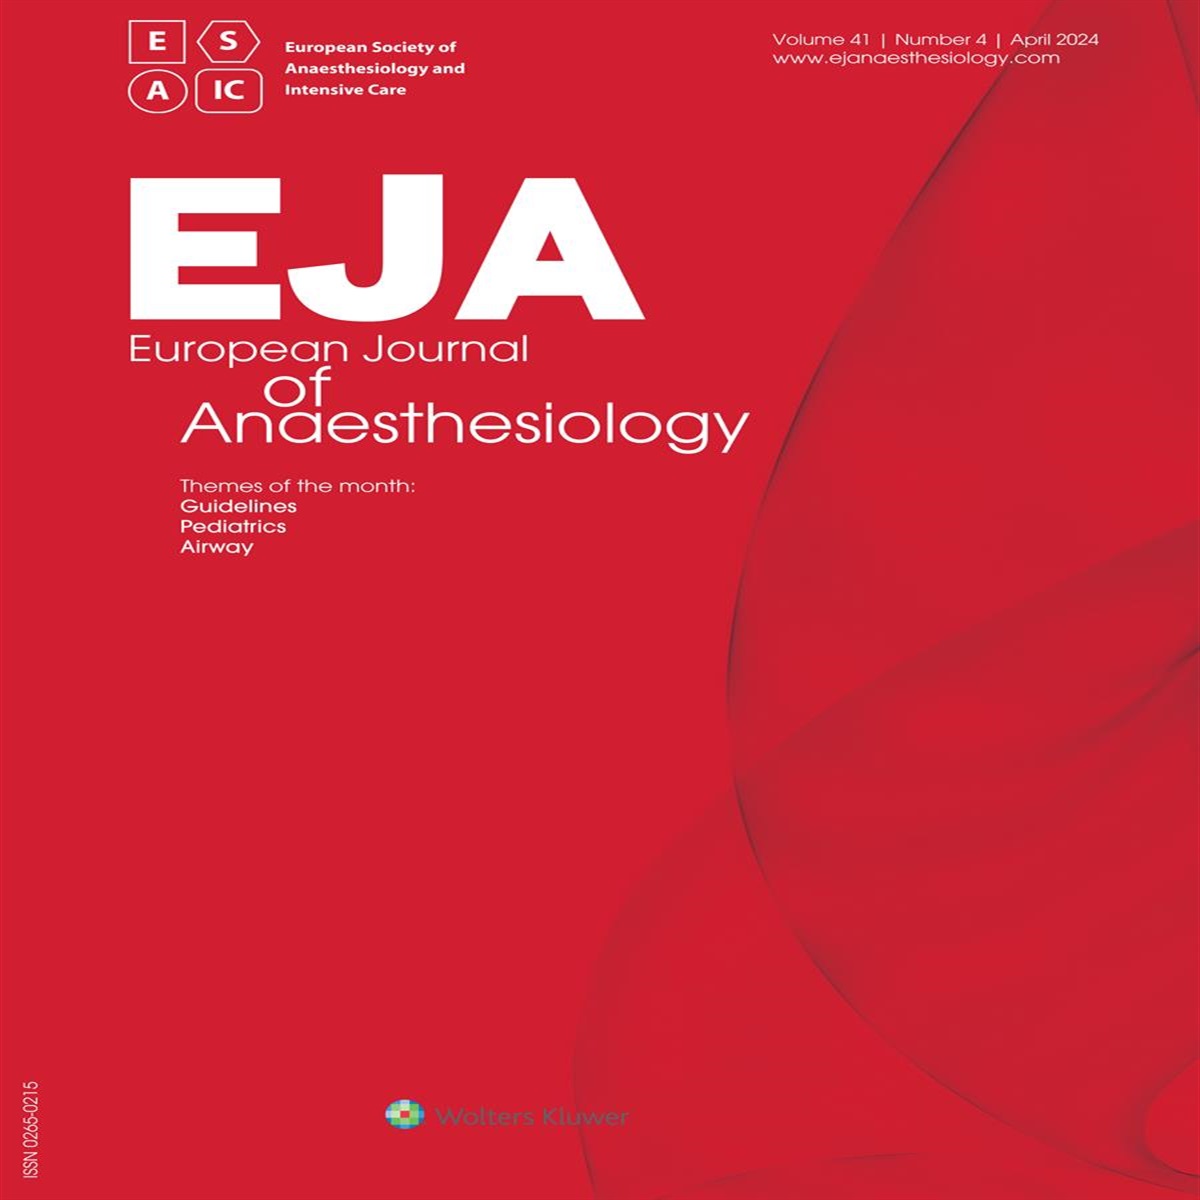 Temperature control after successful resuscitation from cardiac arrest in adults: A joint statement from the European Society for Emergency Medicine and the European Society of Anaesthesiology and Intensive Care